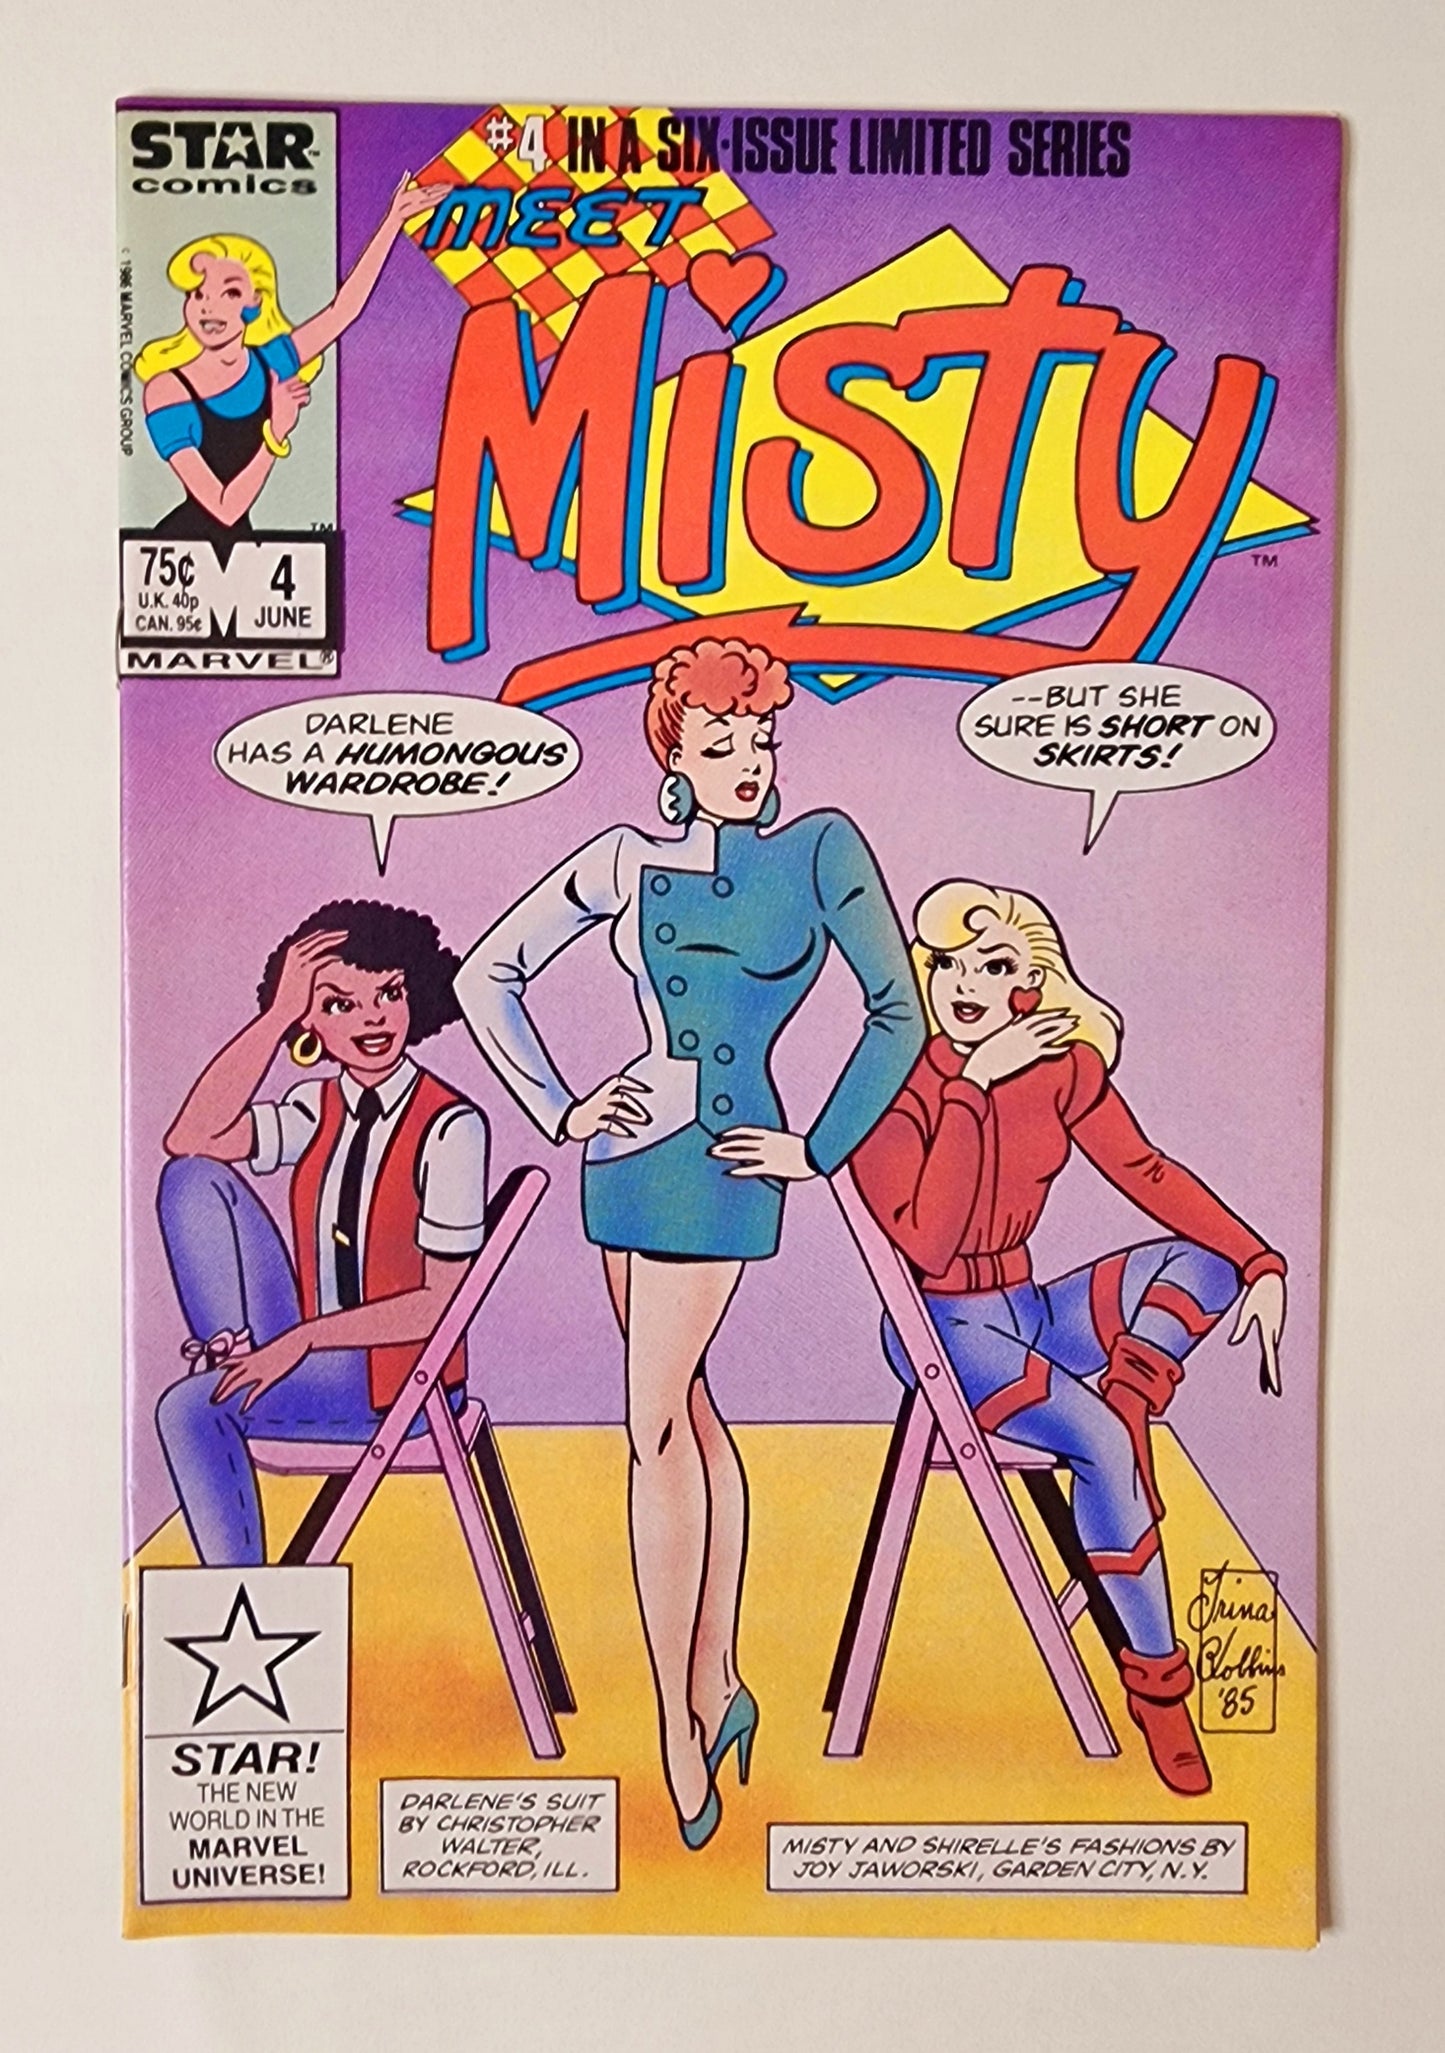 Misty Completed Limited Series